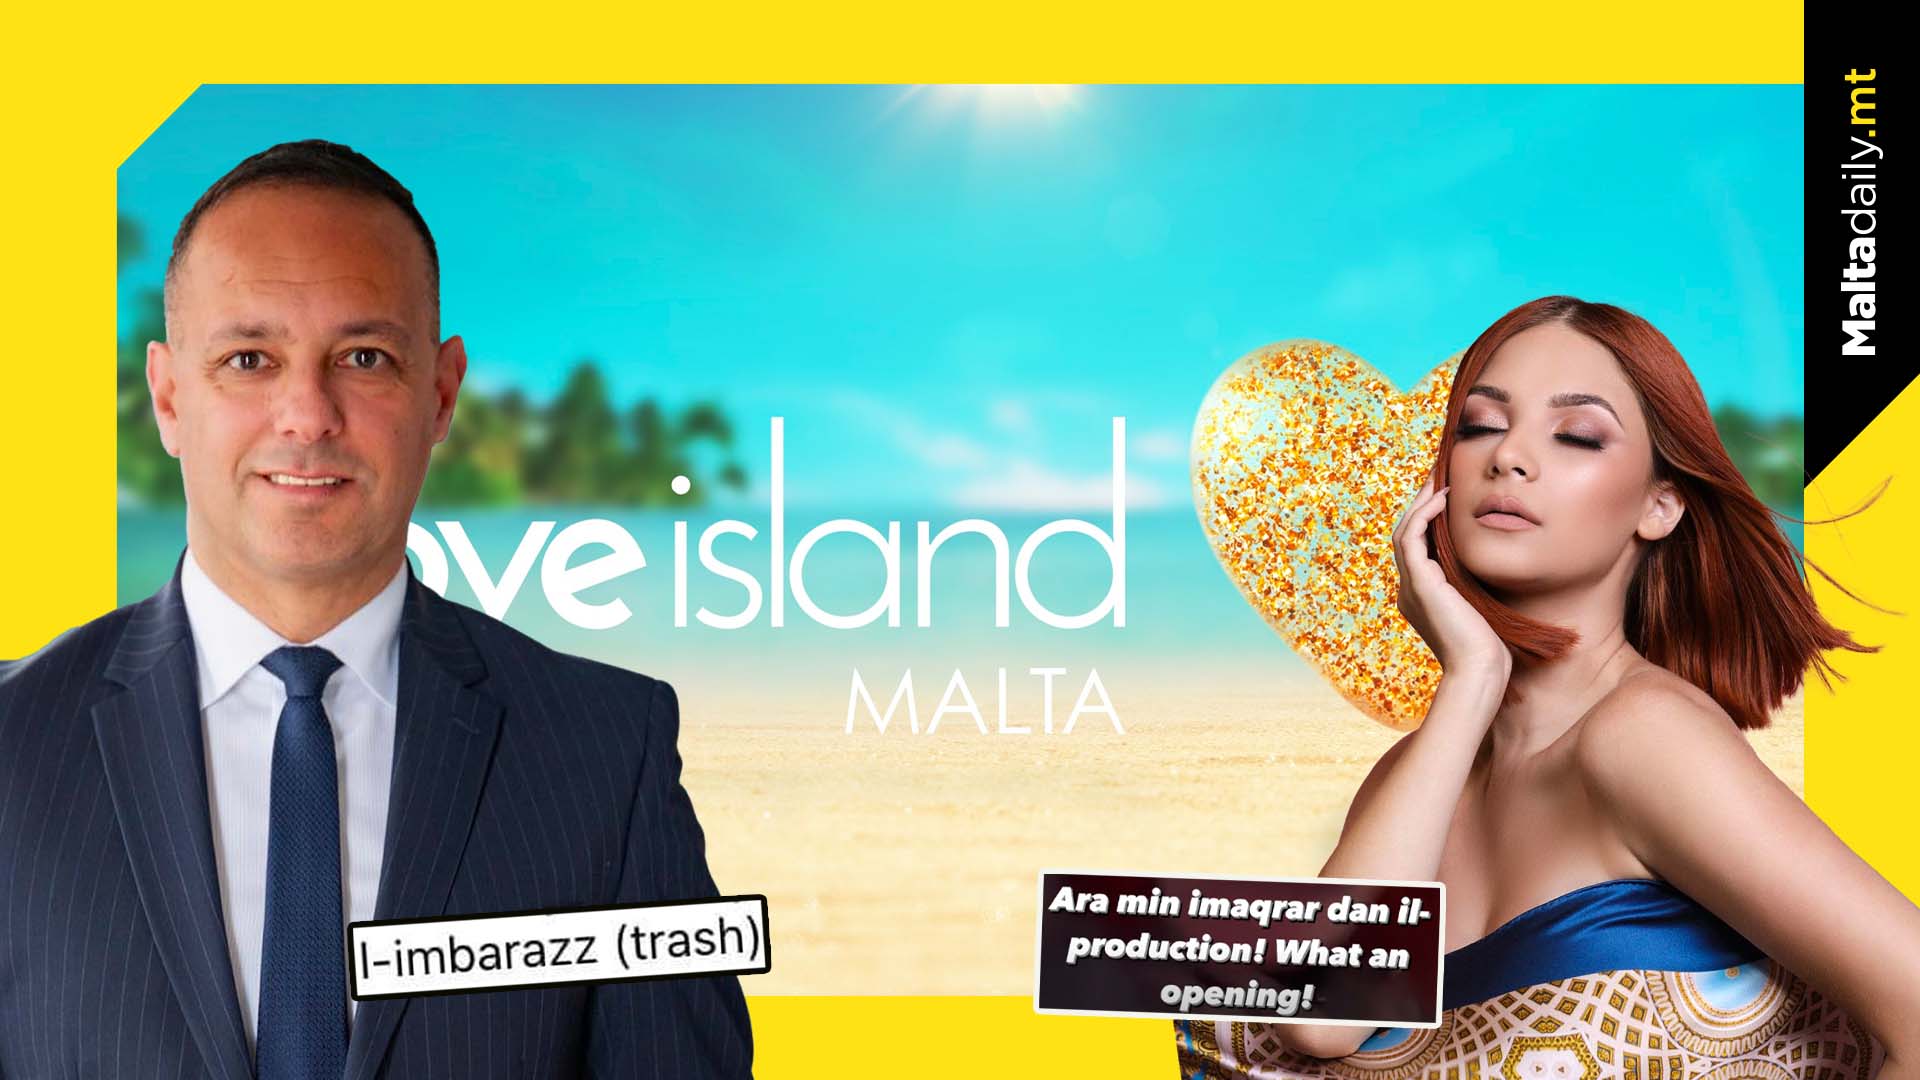 A mixed bag of reactions for Love Island Malta